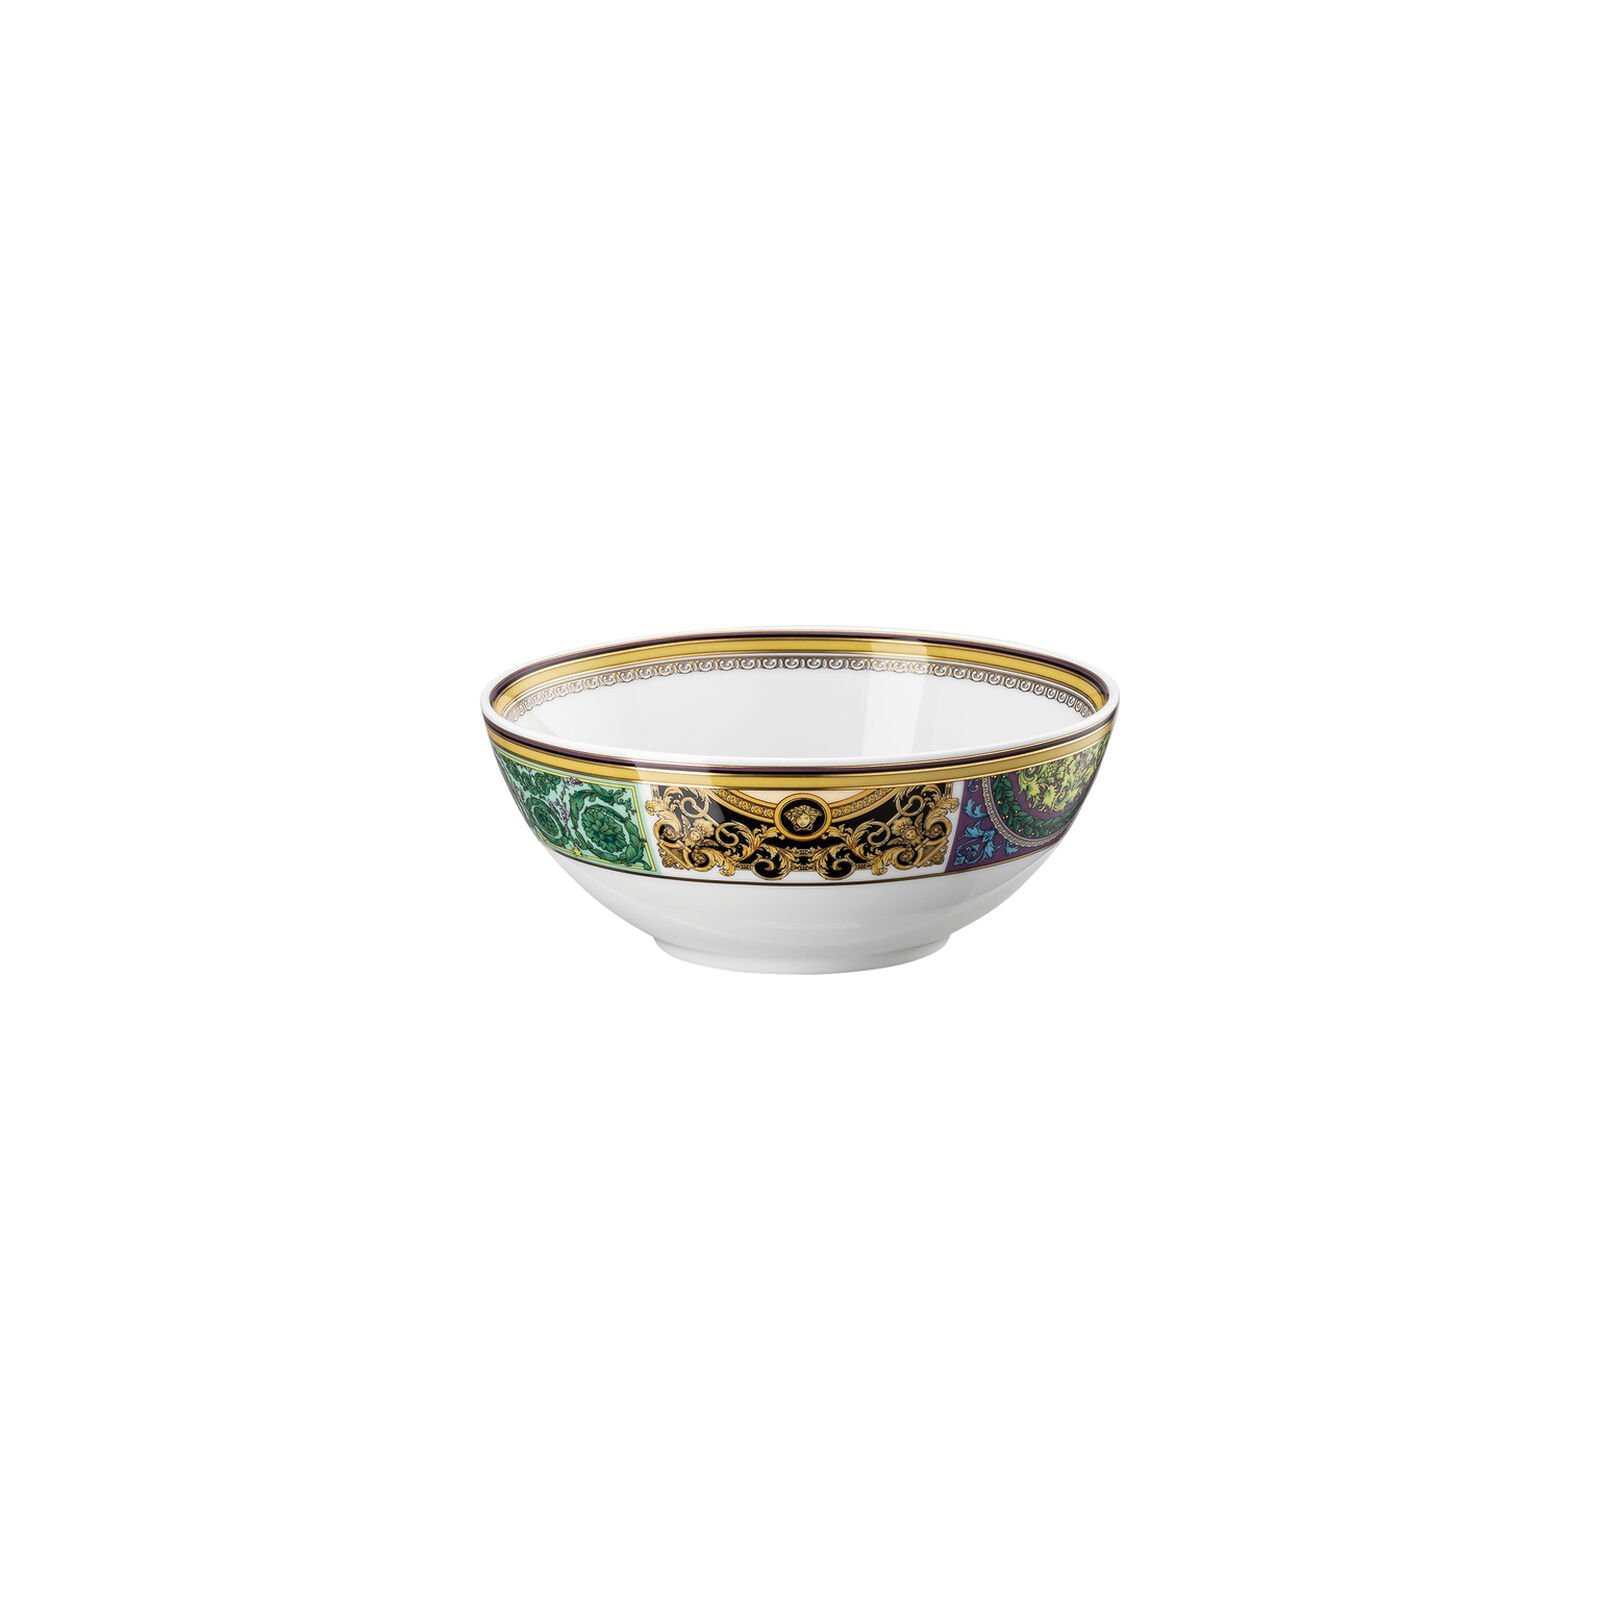 Versace Rosenthal Barocco Mosaic cereal bowl